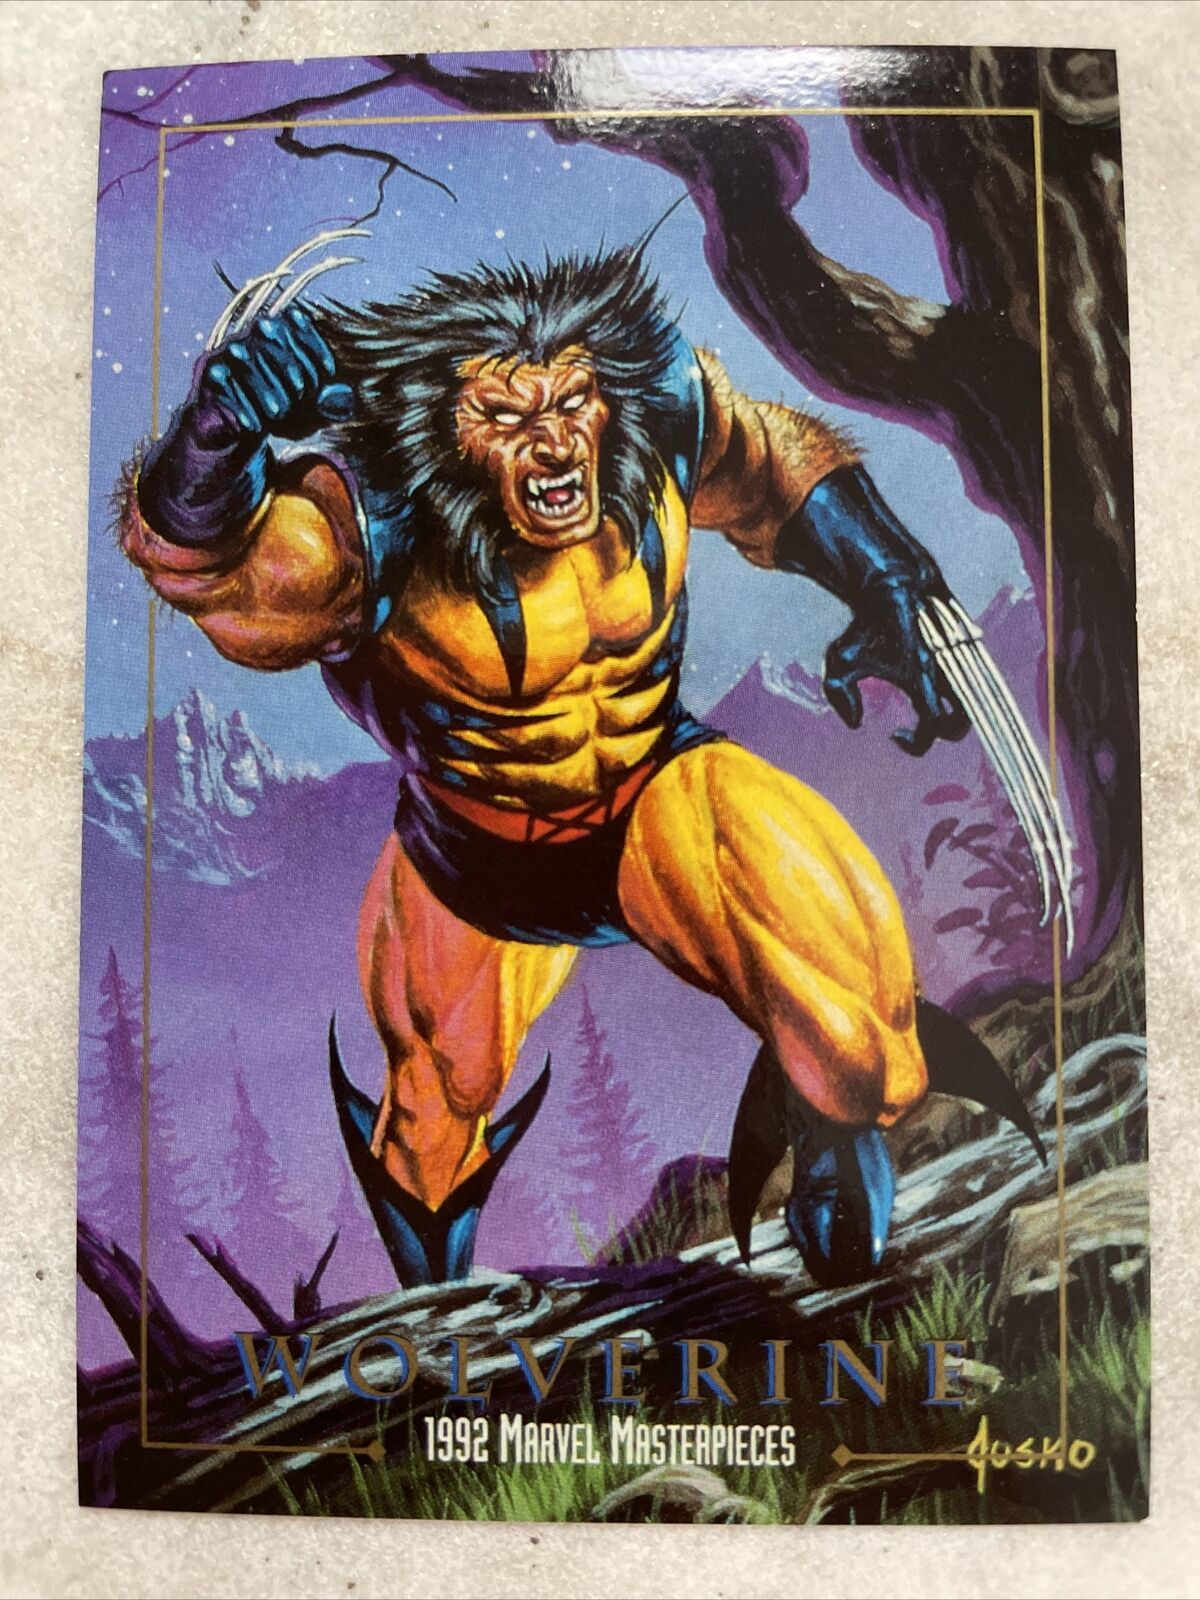 WOLVERINE 1992 Marvel Masterpieces NM Condition BLUE BACK PROMO CARD/RARE